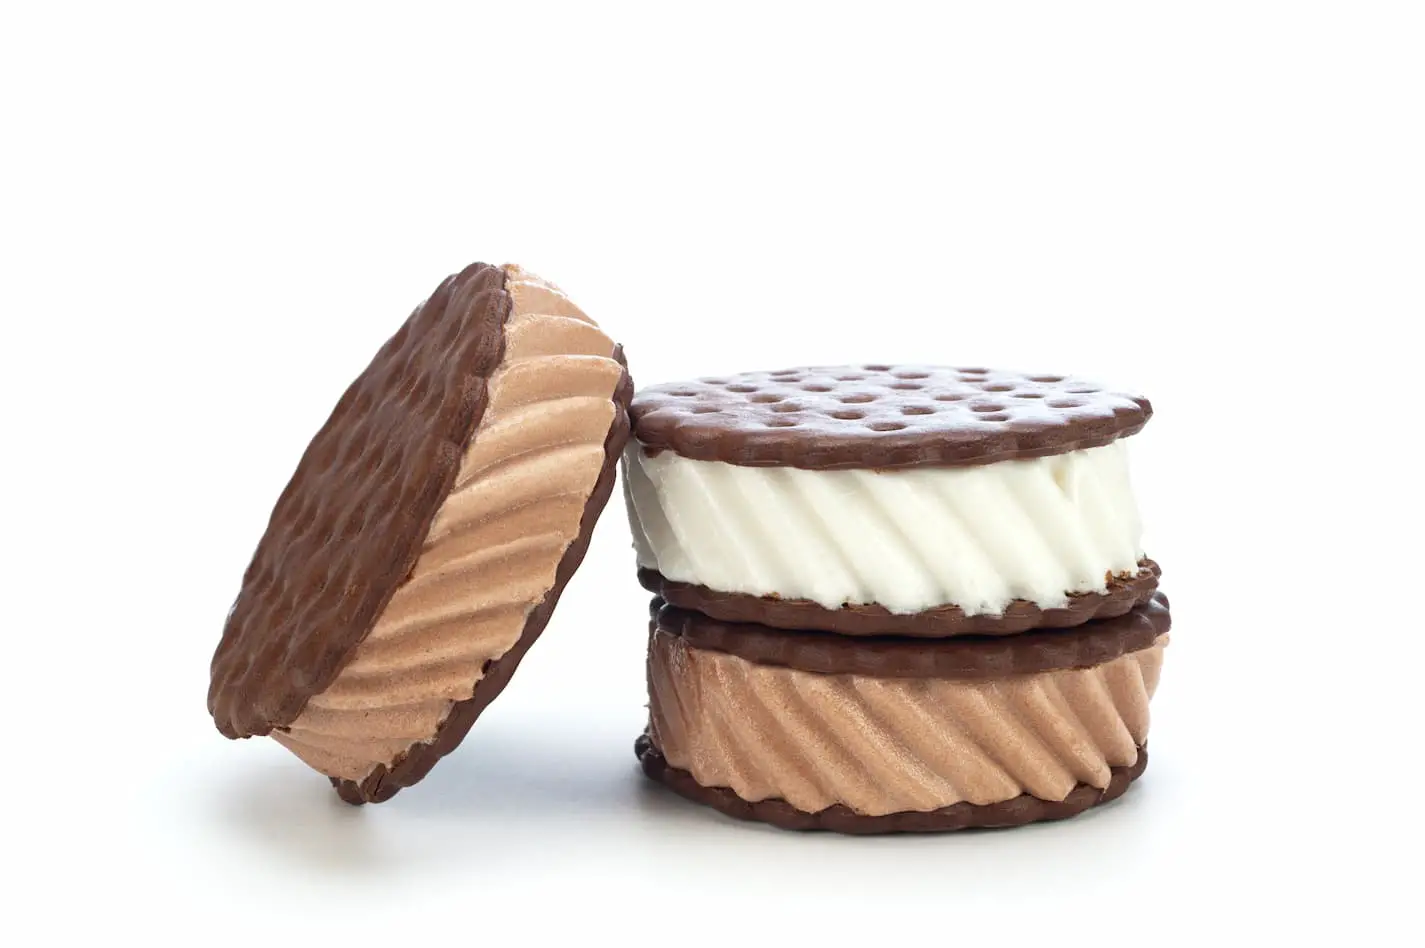 An image of ice cream sandwiches before being freeze-dried.